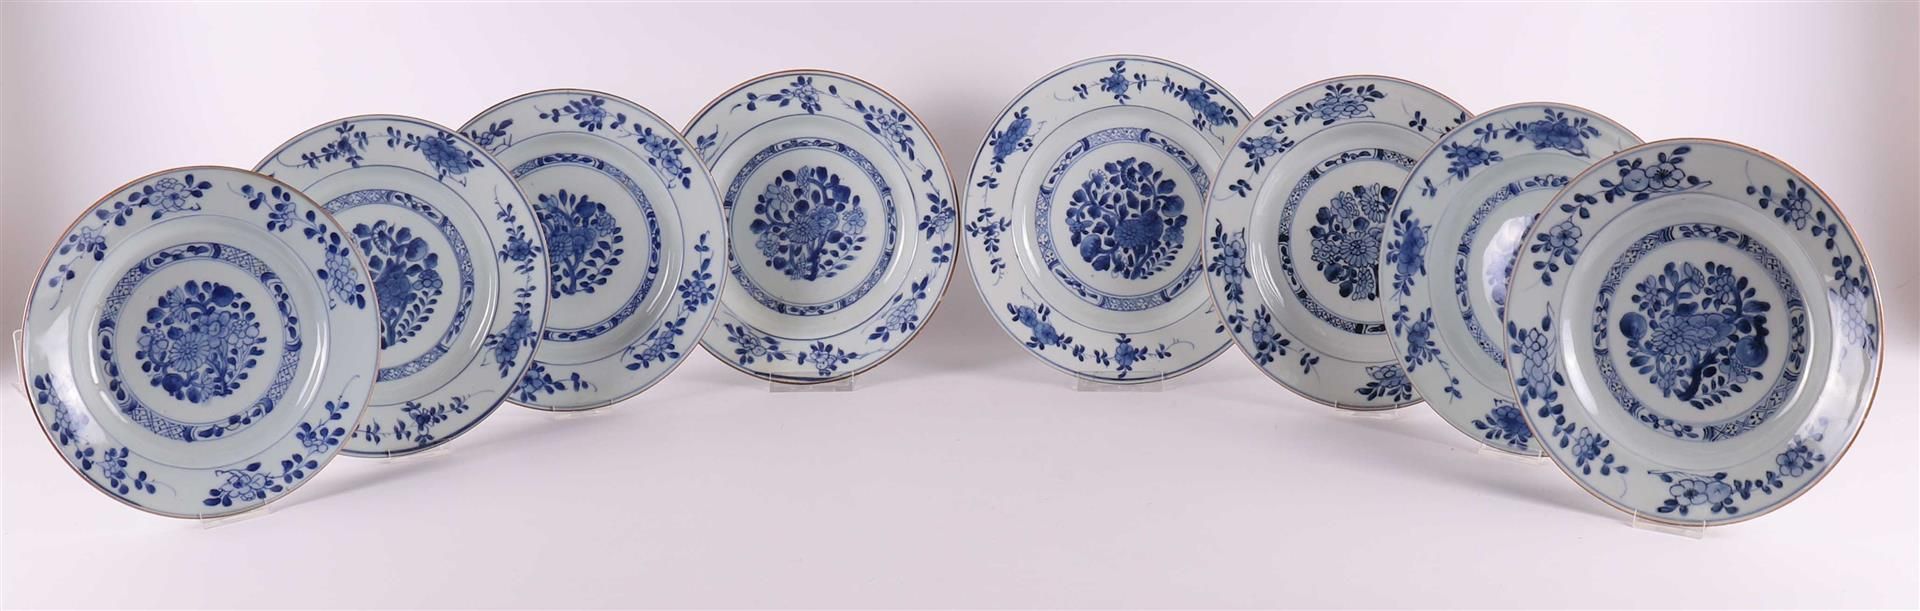 A series of eight blue/white porcelain plates, China, Qianlong, 18th century.